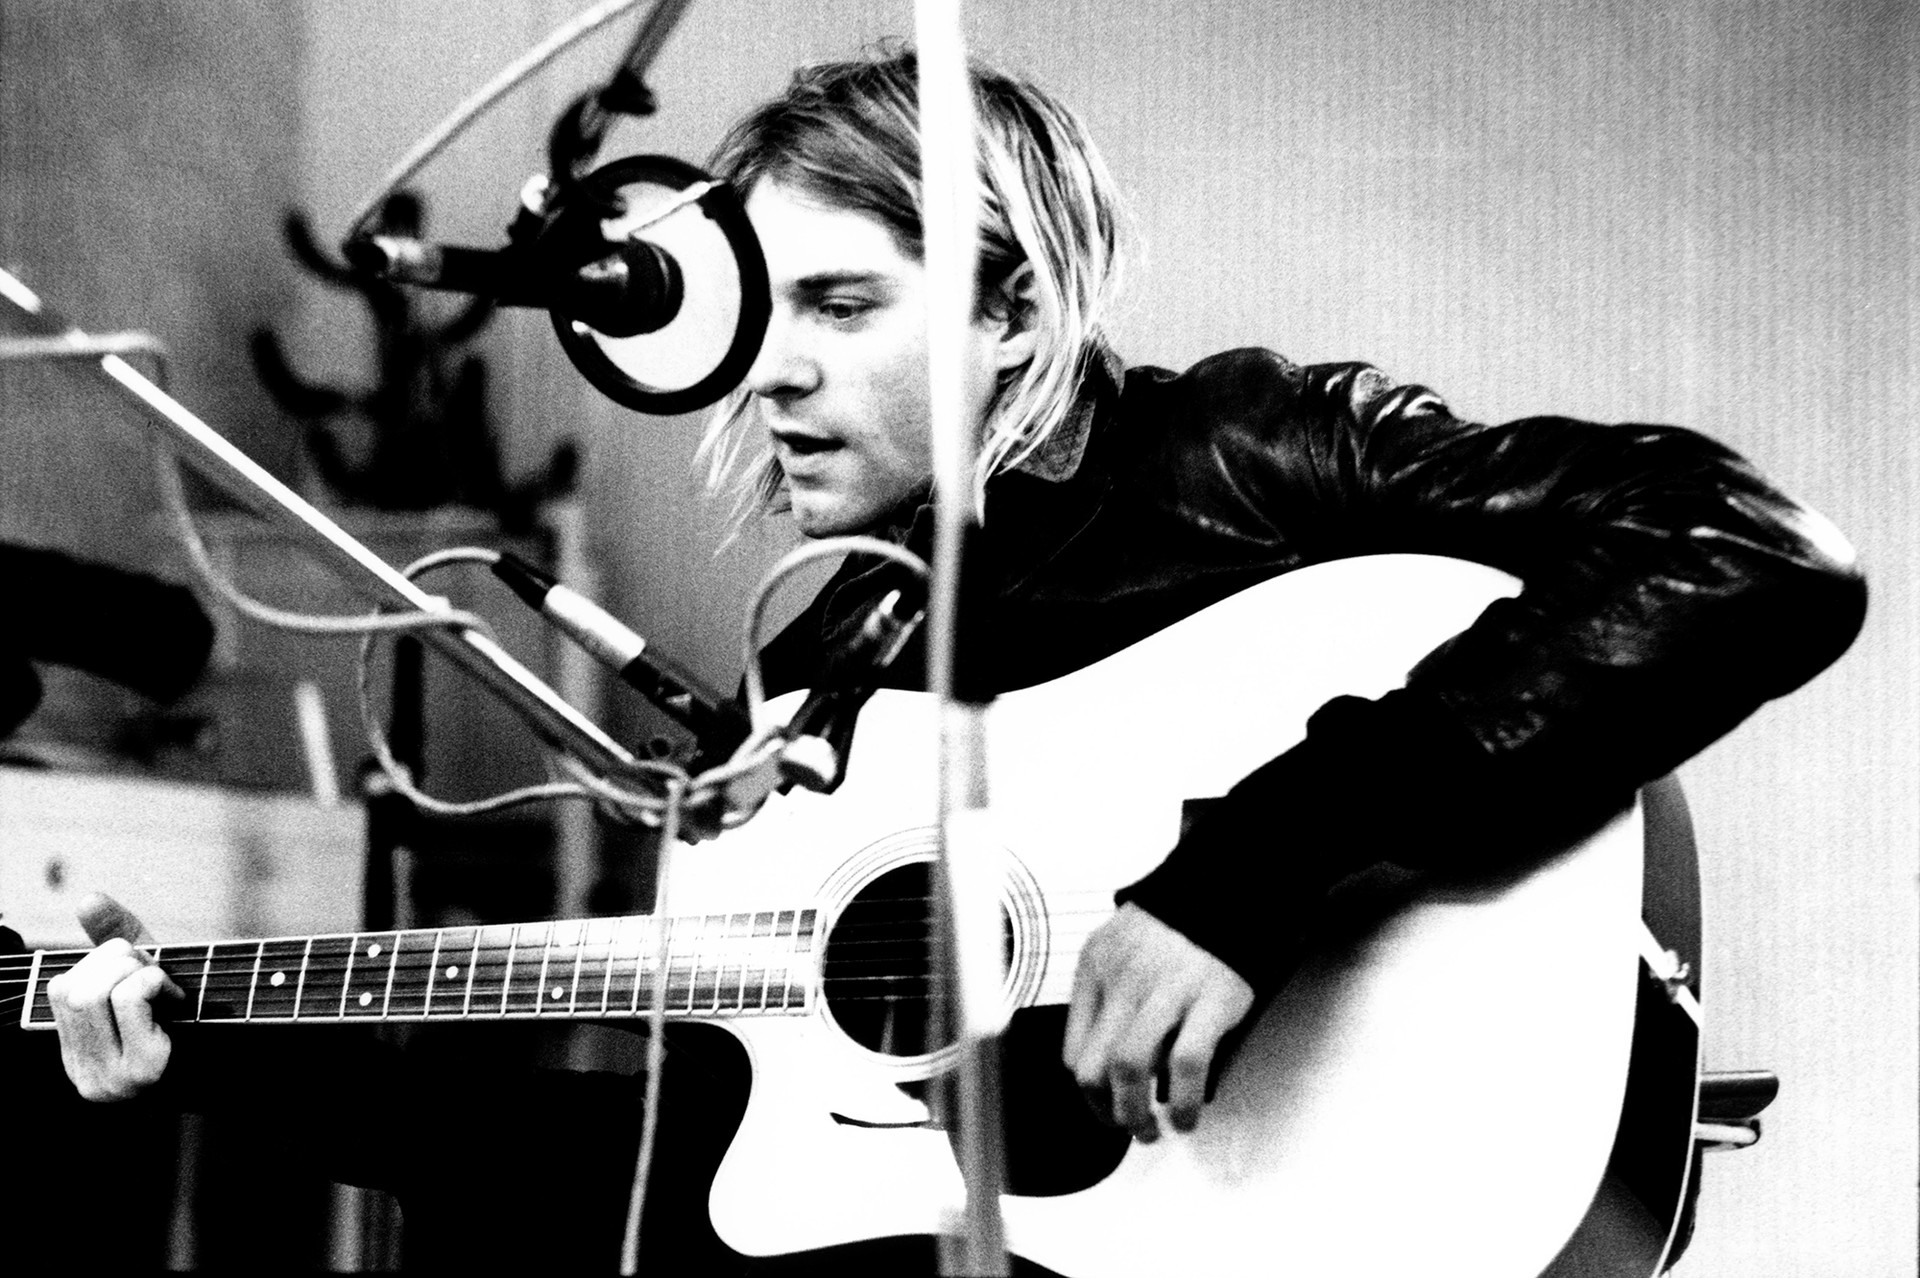 Kurt Cobain of Nirvana (the mic on the photo is not produced by the Oktava plant)